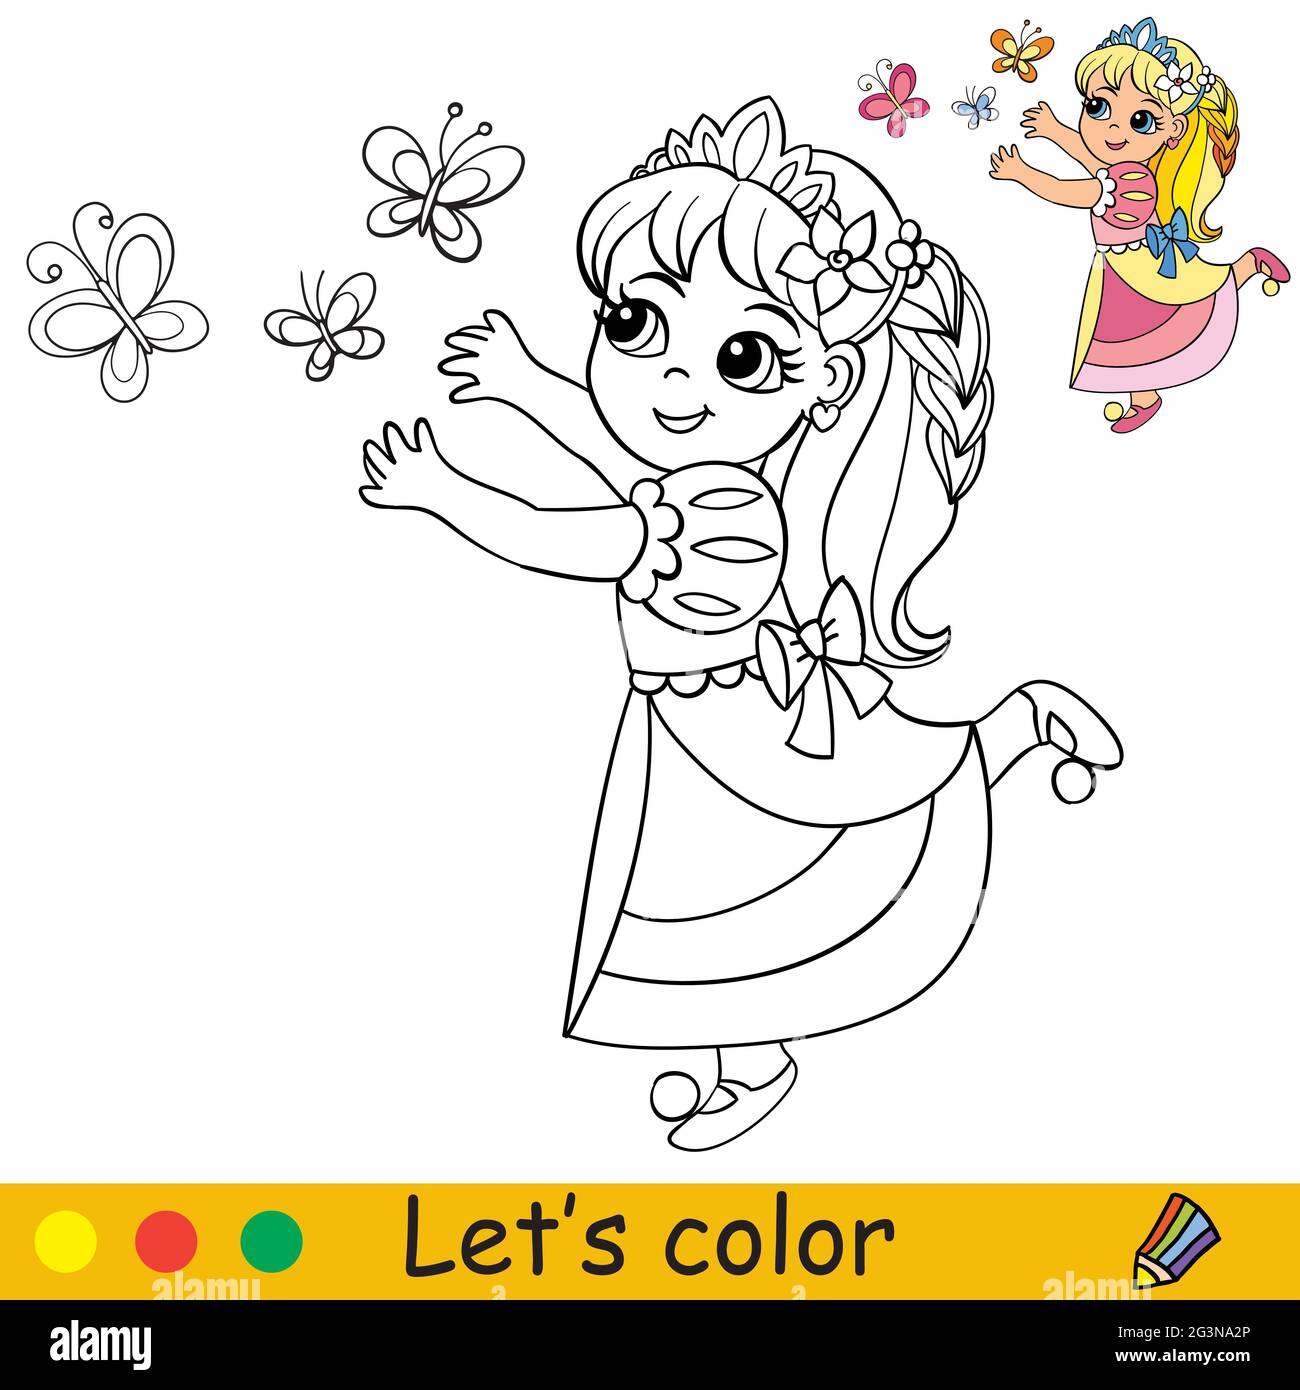 Cute little princess in dress catches beautiful butterflies coloring book page with colorful template for kids vector isolated illustration for col stock vector image art